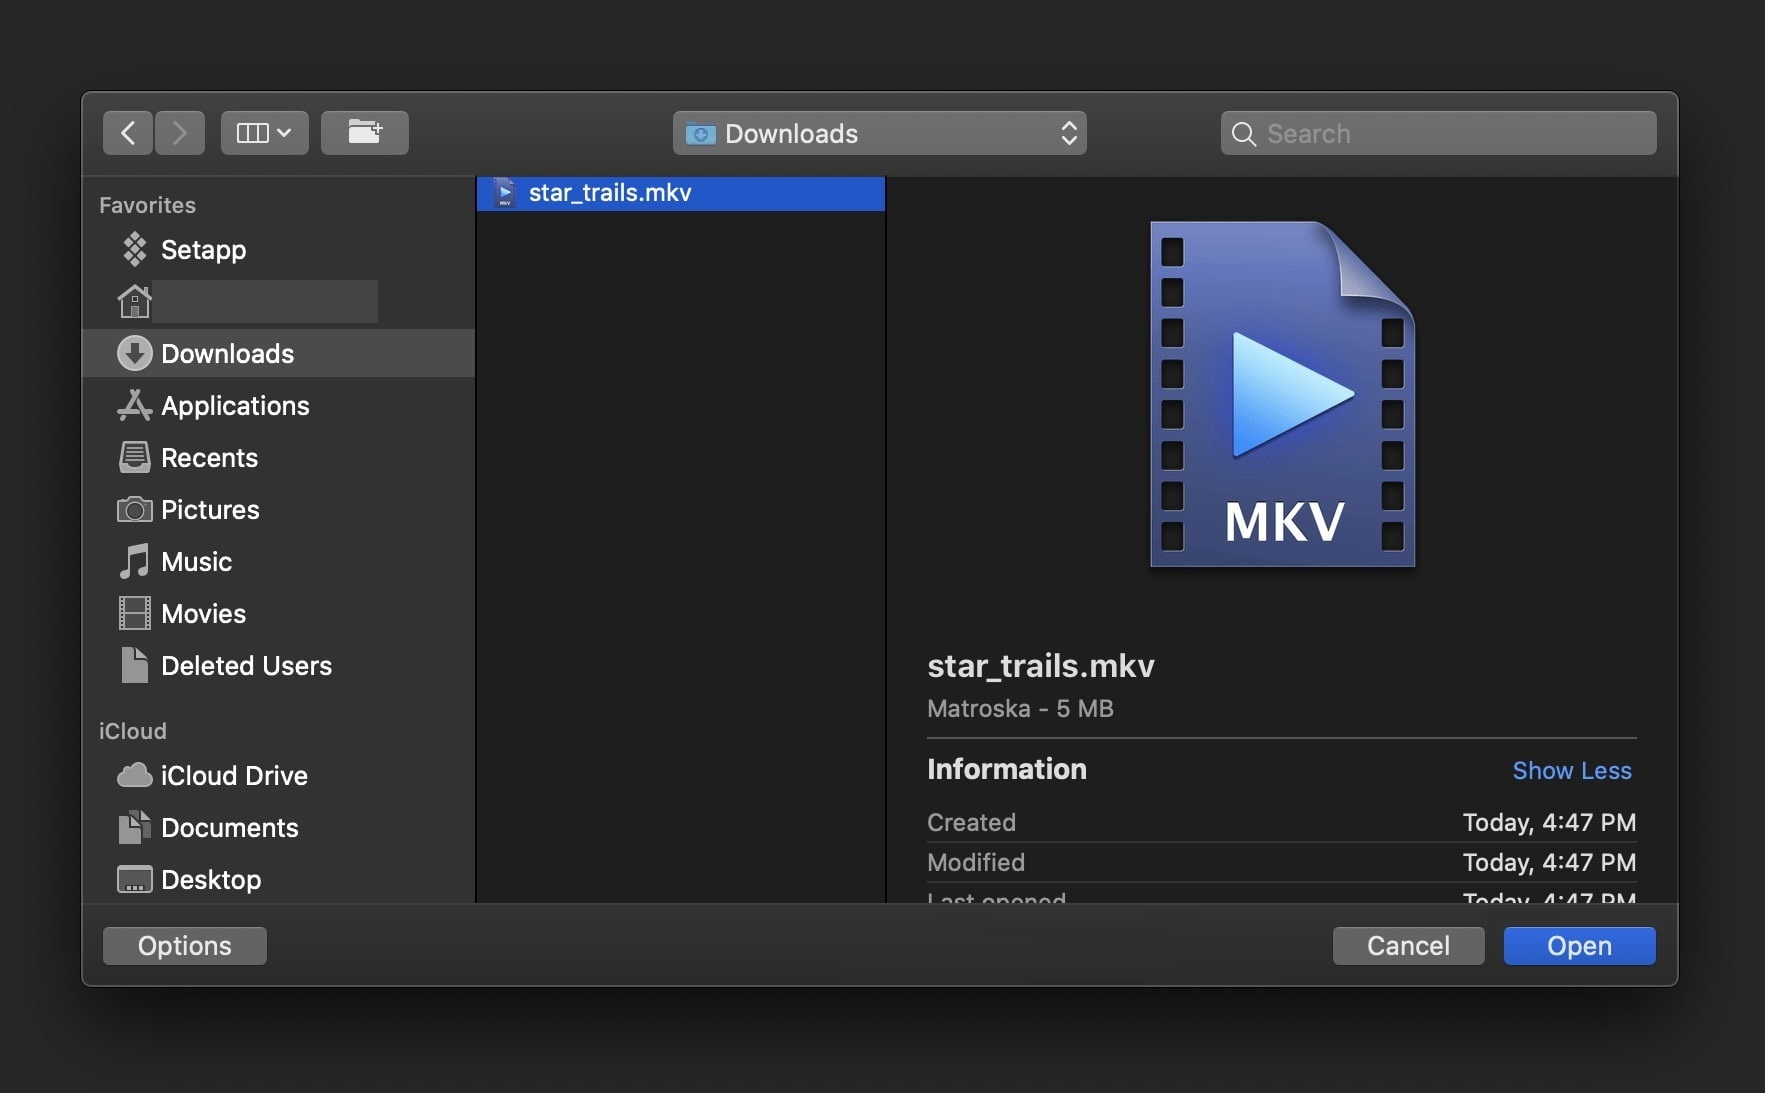 What Is An MKV File?